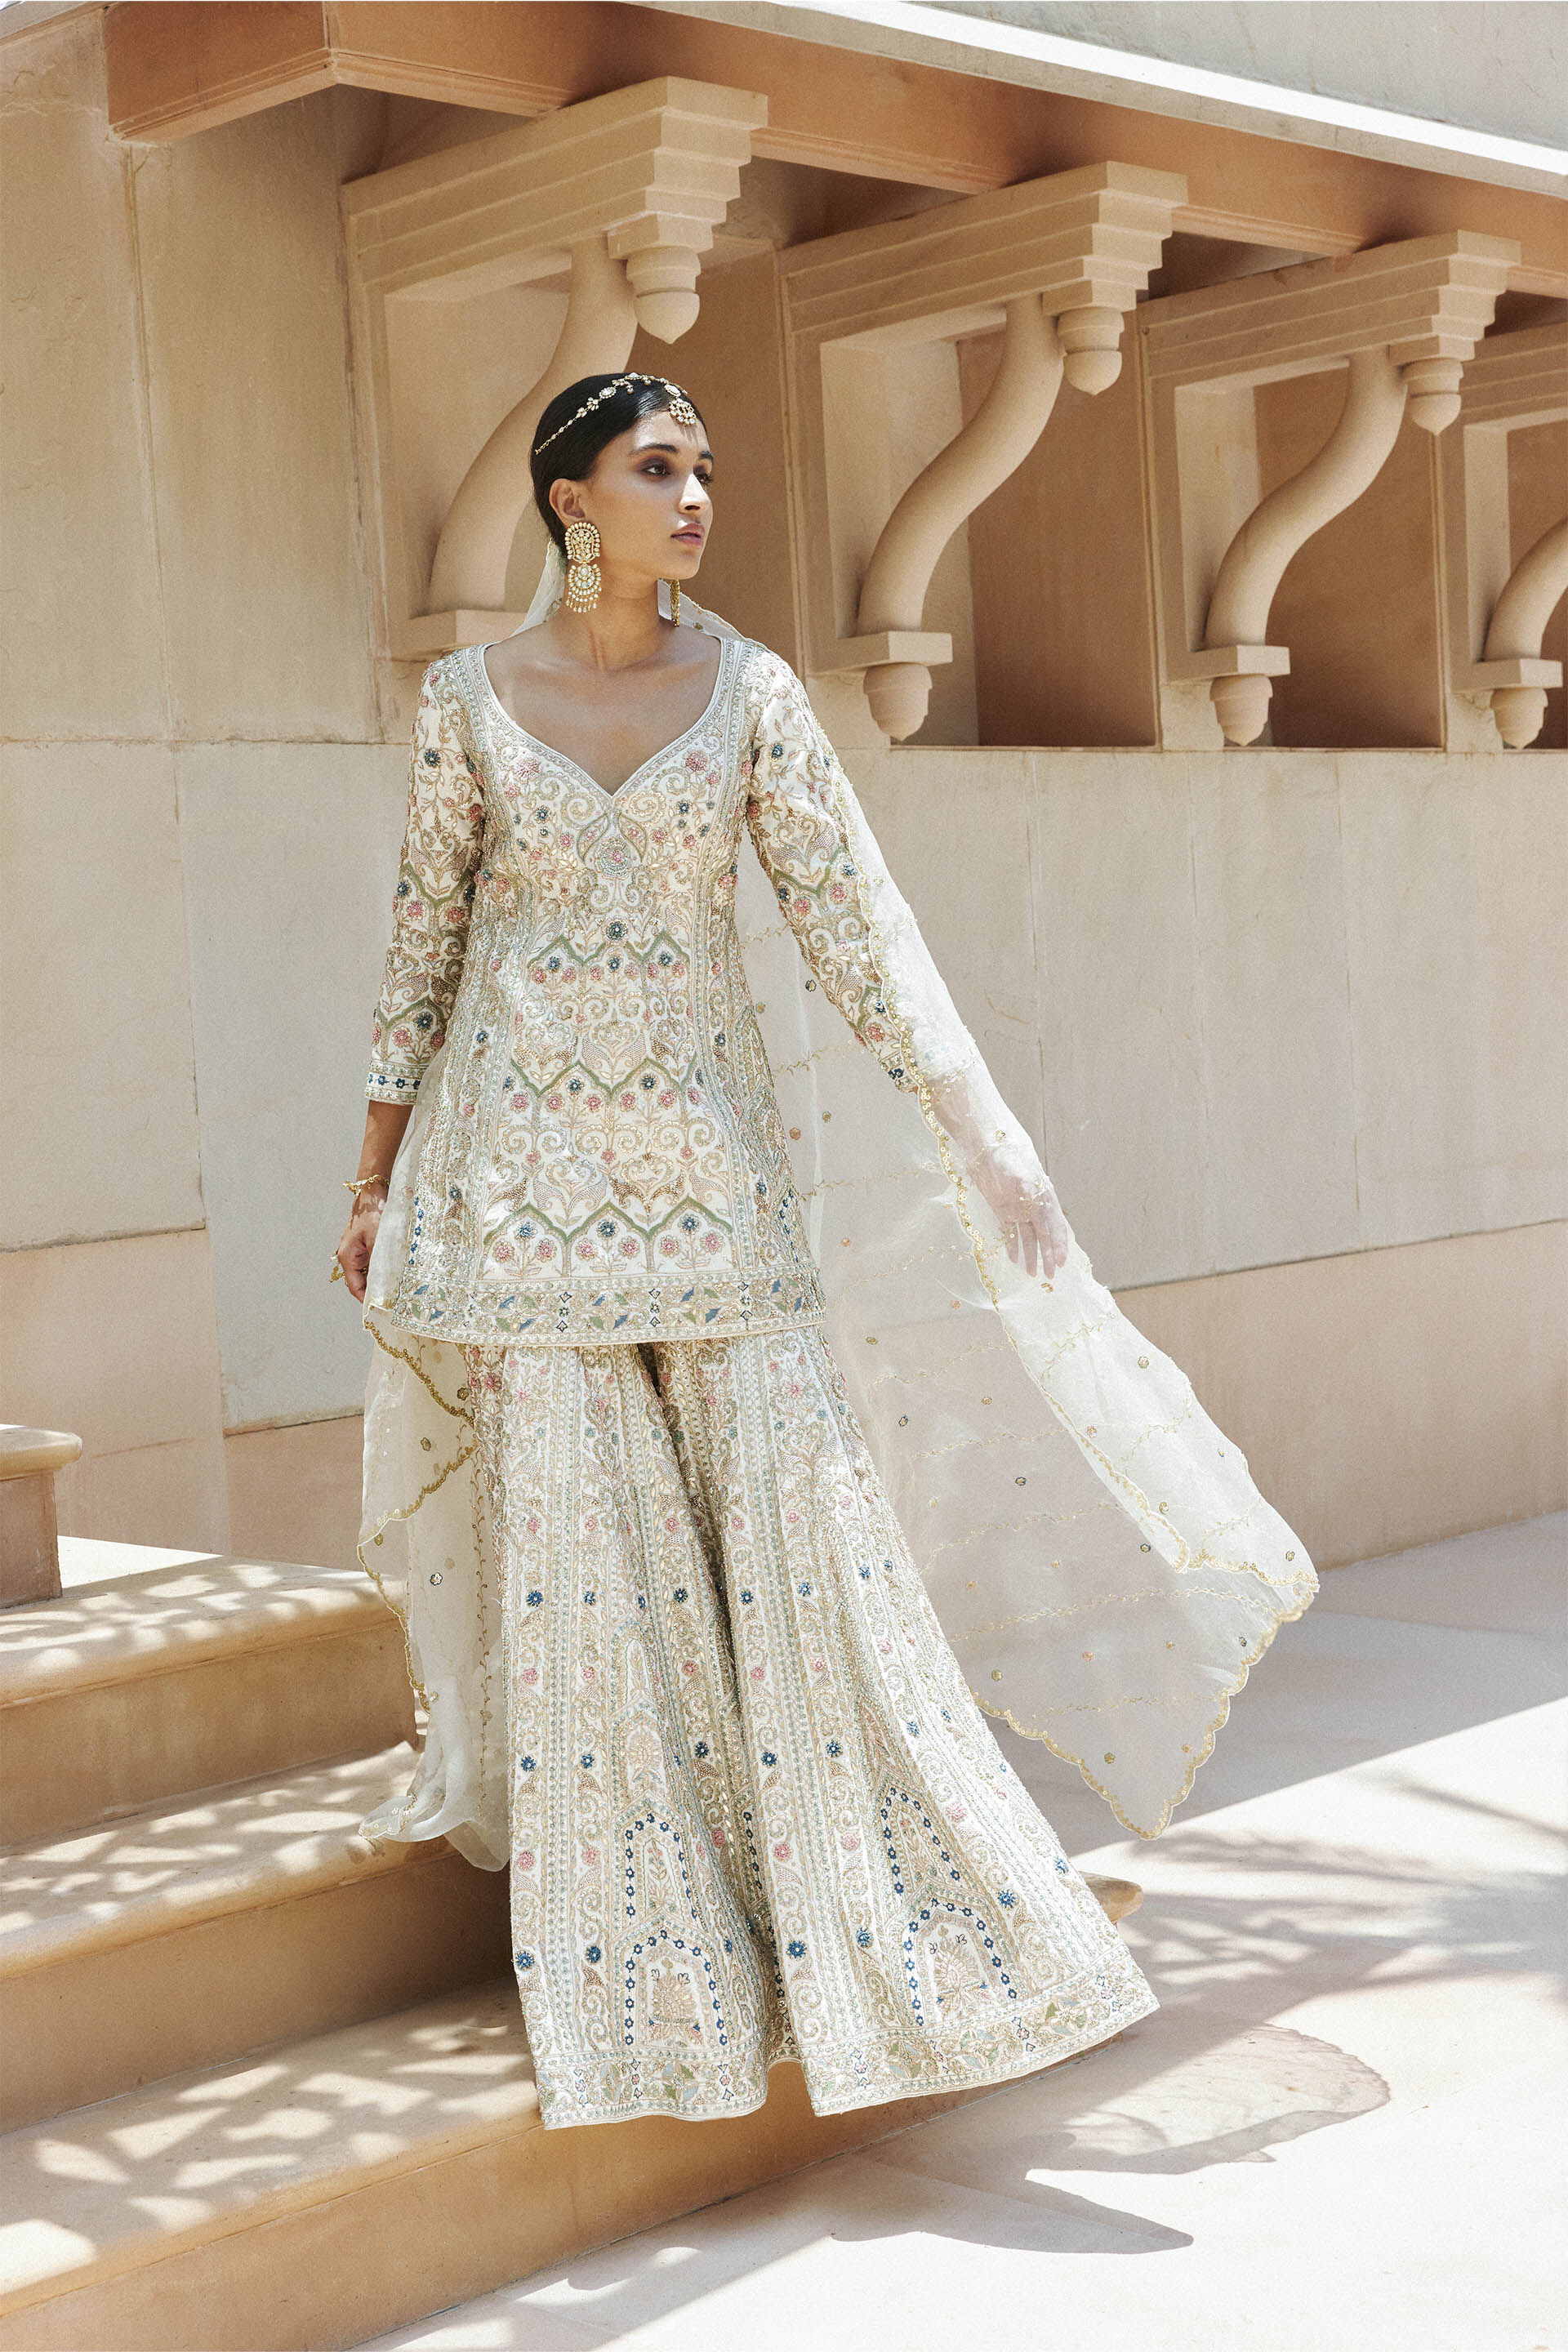 Anita Dongre's latest bridal couture collection is an ode to its wearer